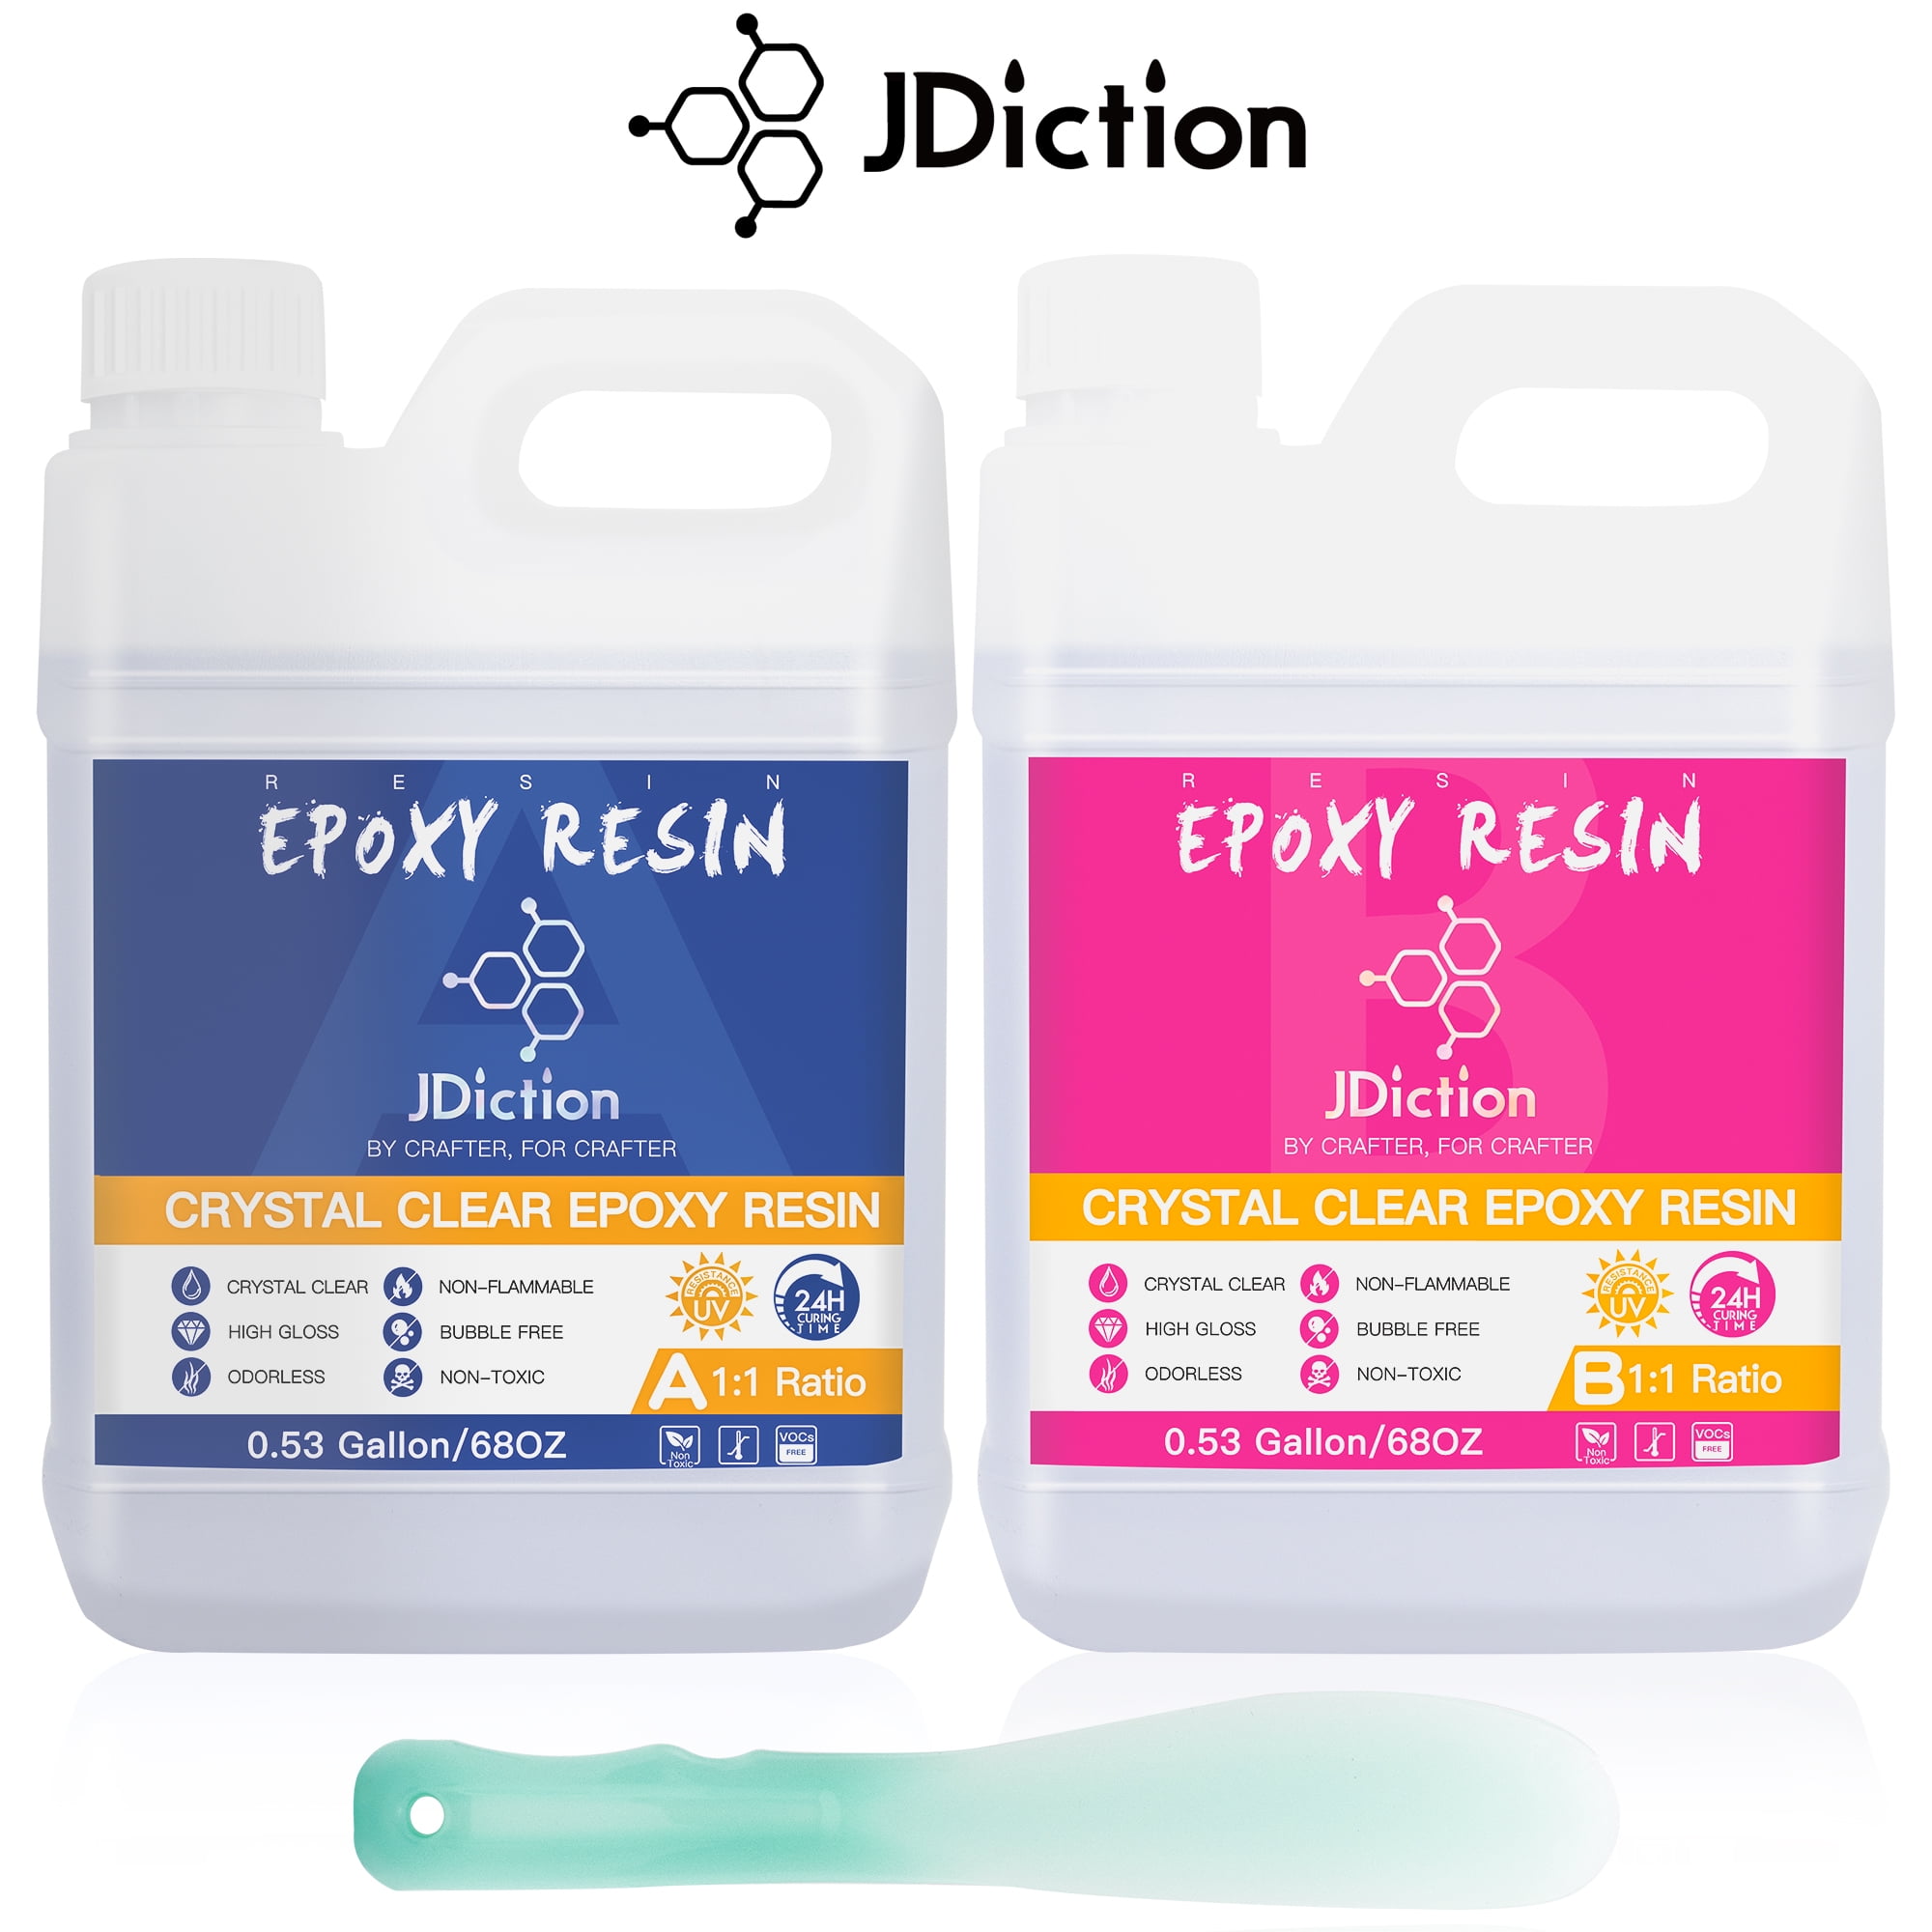 2 Gallons Premium Epoxy Resin Kit | Clear Resin for Tabletop, Bar Top, Countertop | Non-Yellowing, Glossy & Auto-Leveling | Non-Toxic, FDA & Low Odor